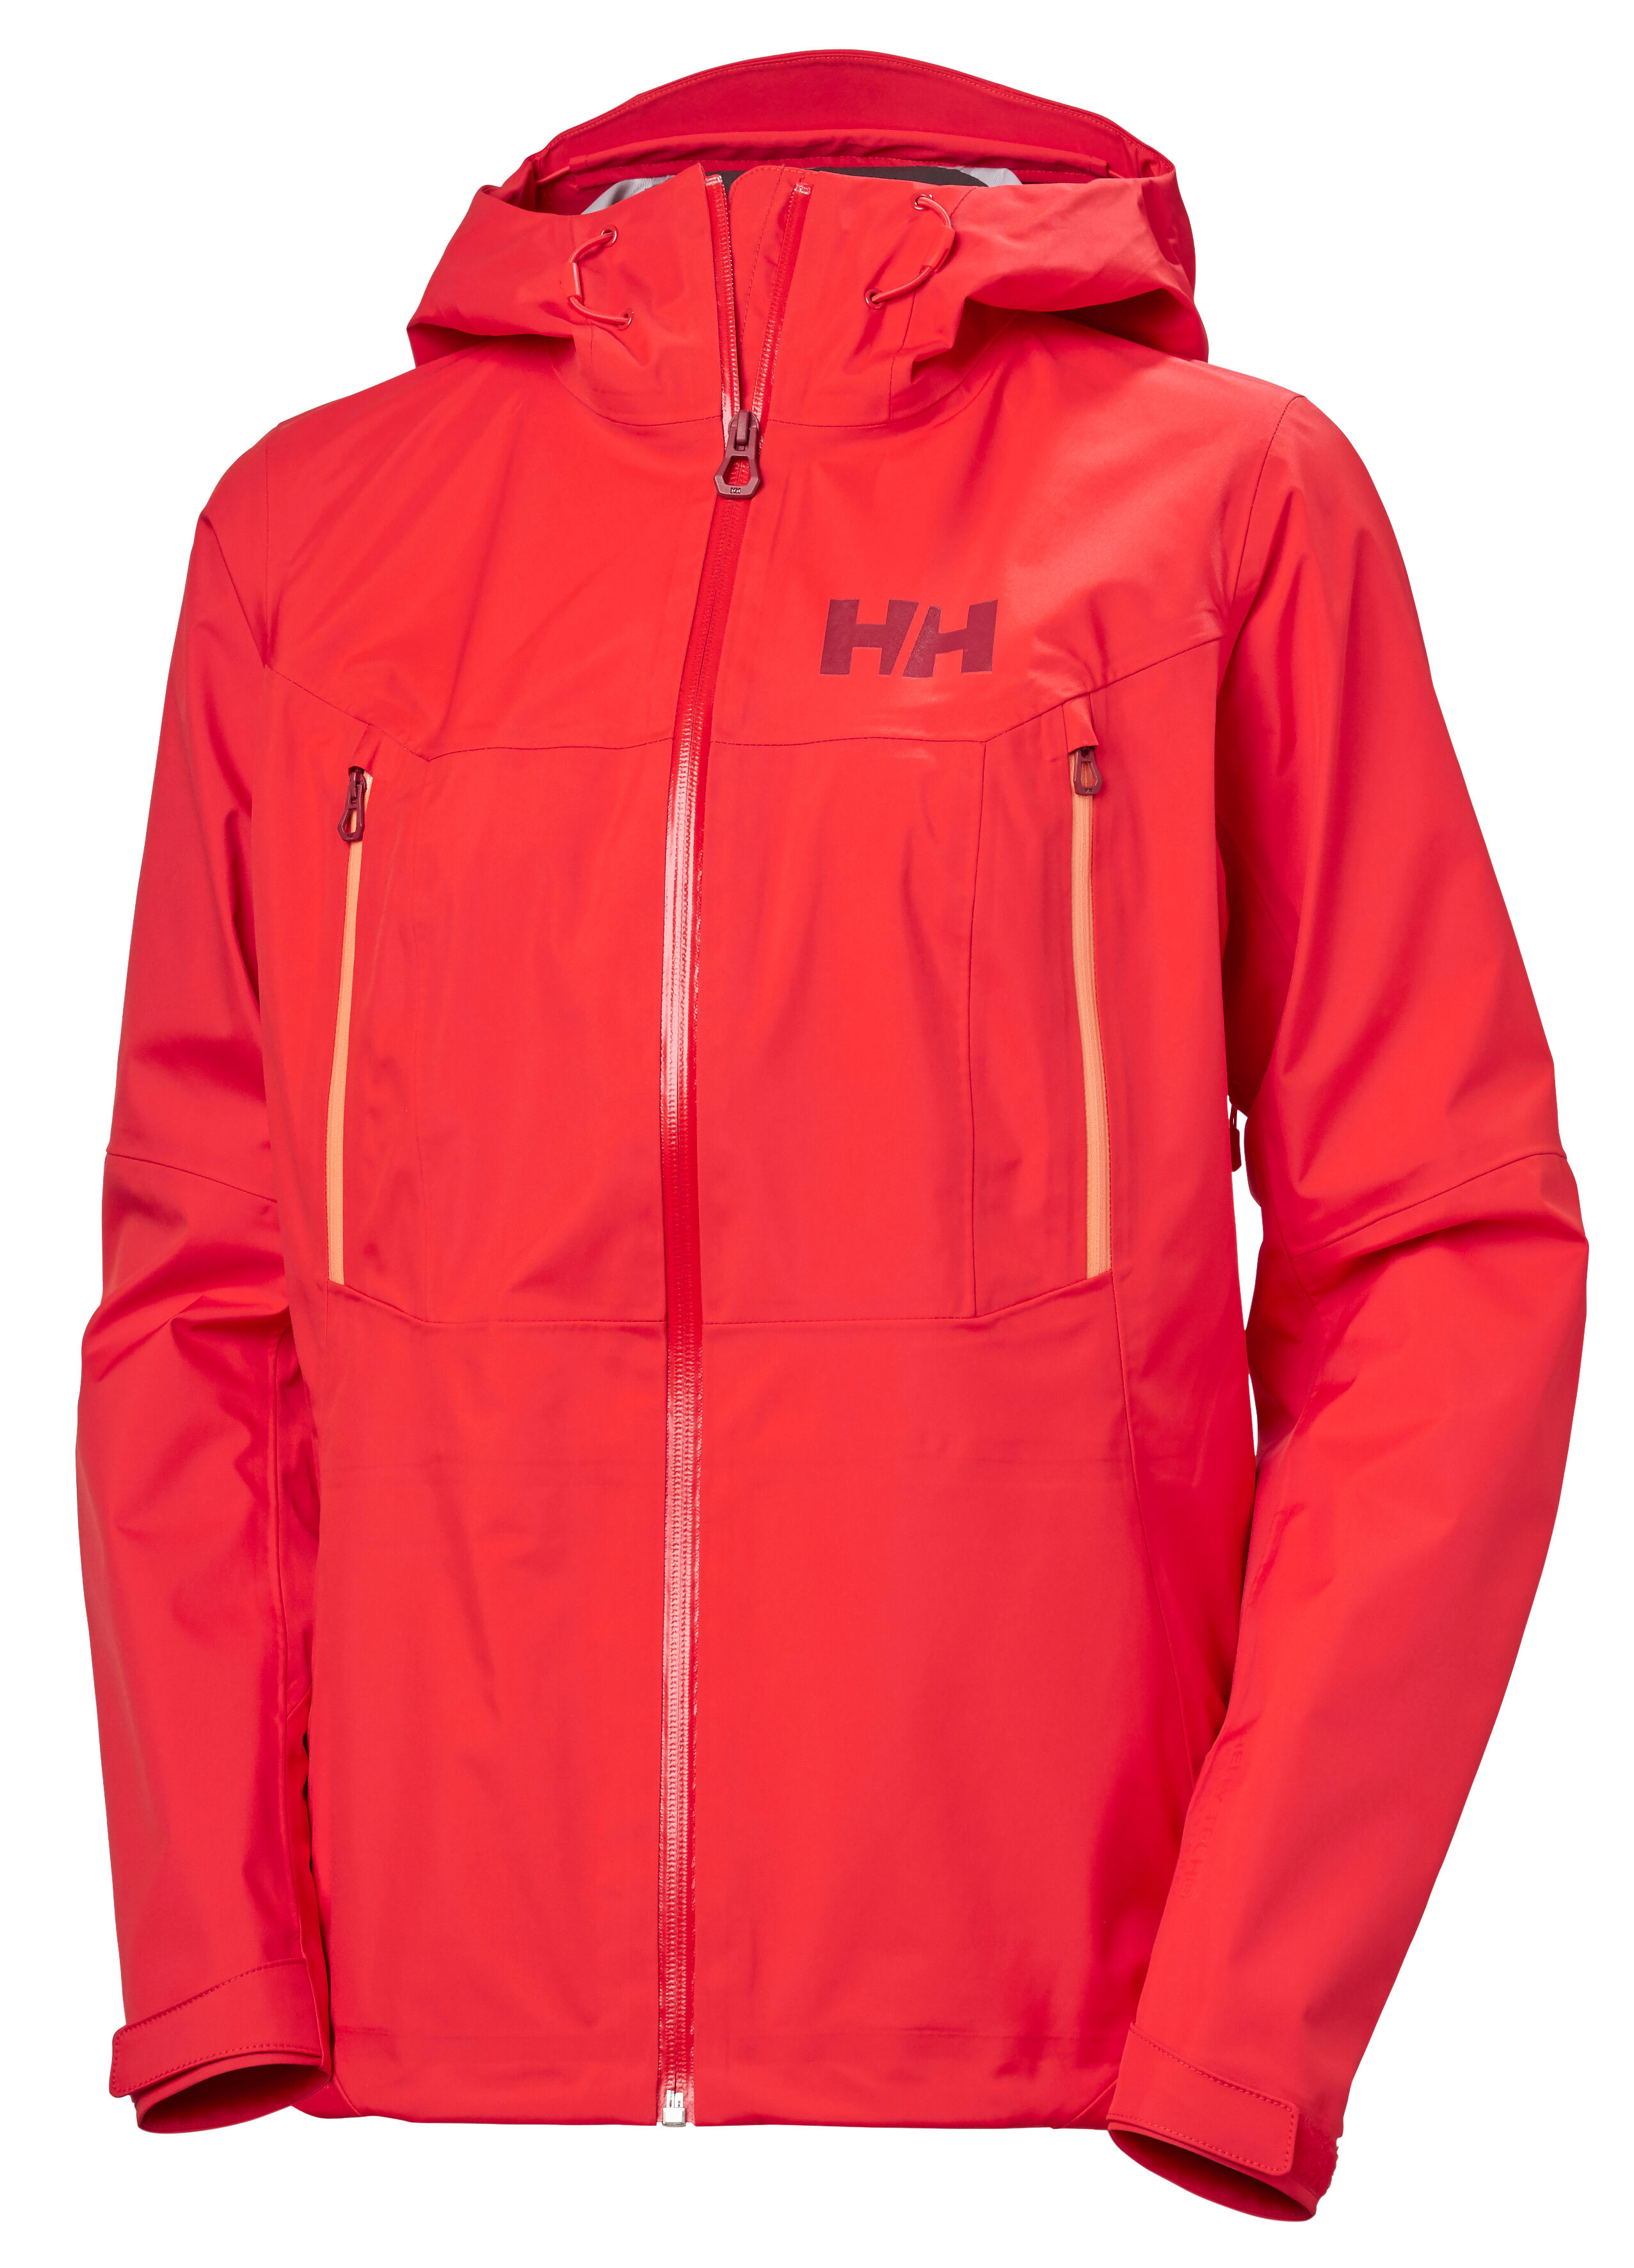 Helly Hansen Verglas 3L Shell Jacket - Chaqueta impermeable - Mujer